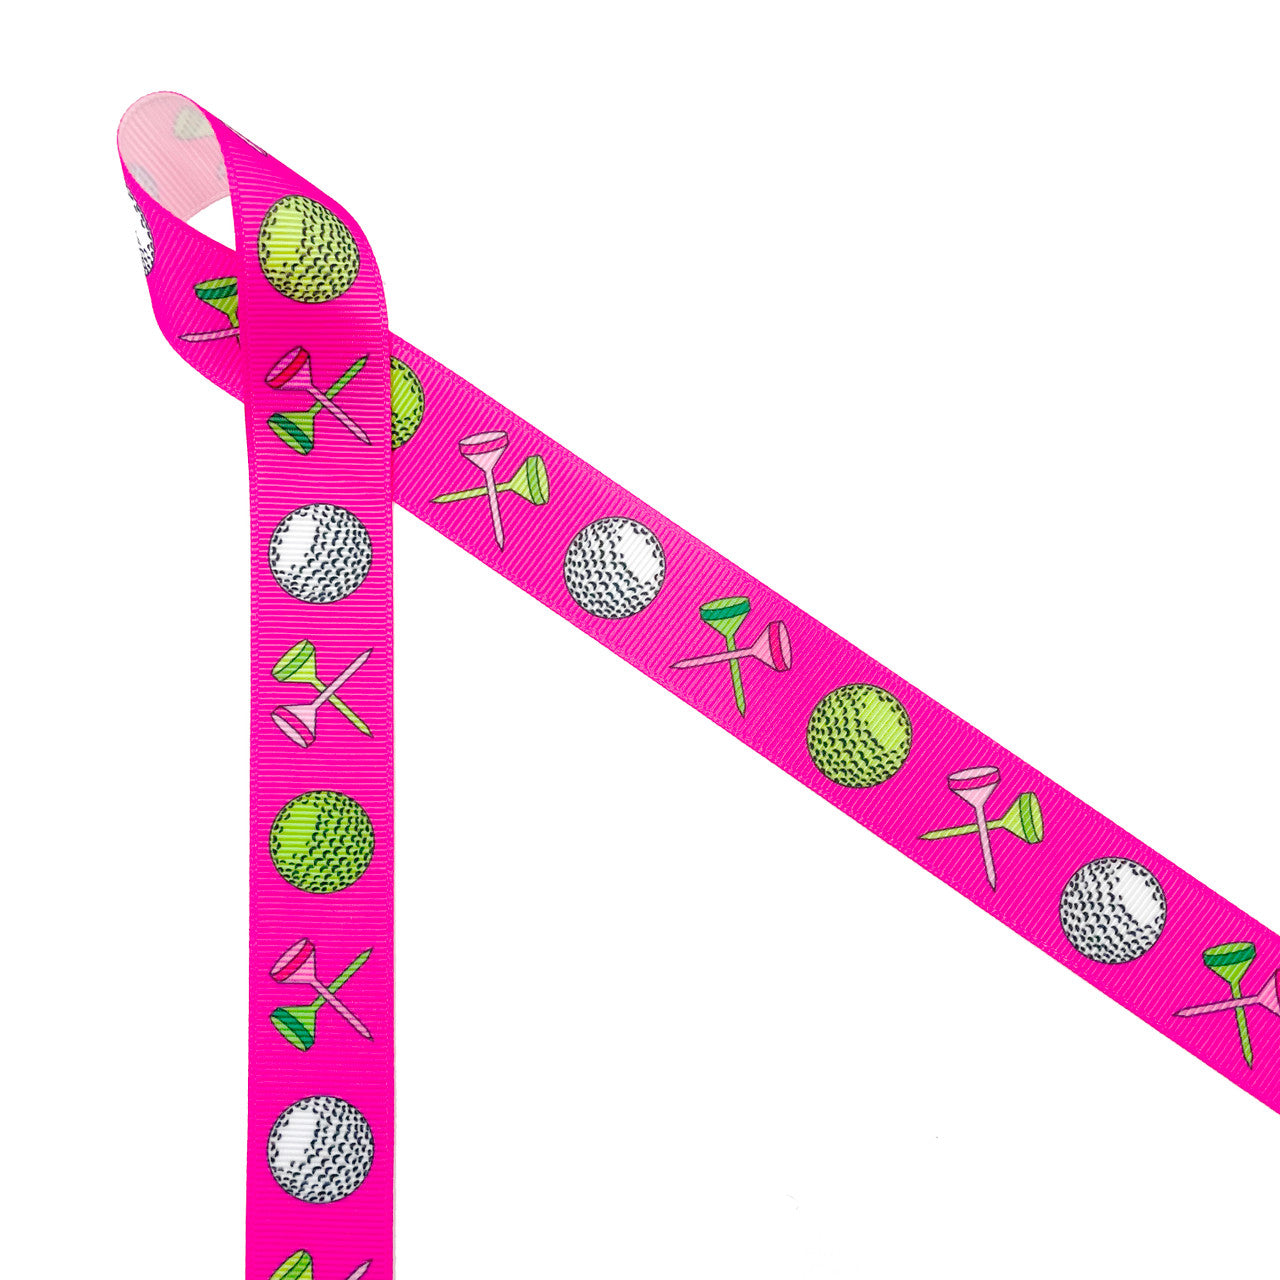 Golf ribbon Women's golf featuring golf balls and crossed tees on a hot pink background printed on 7/8" white grosgrain or white satin